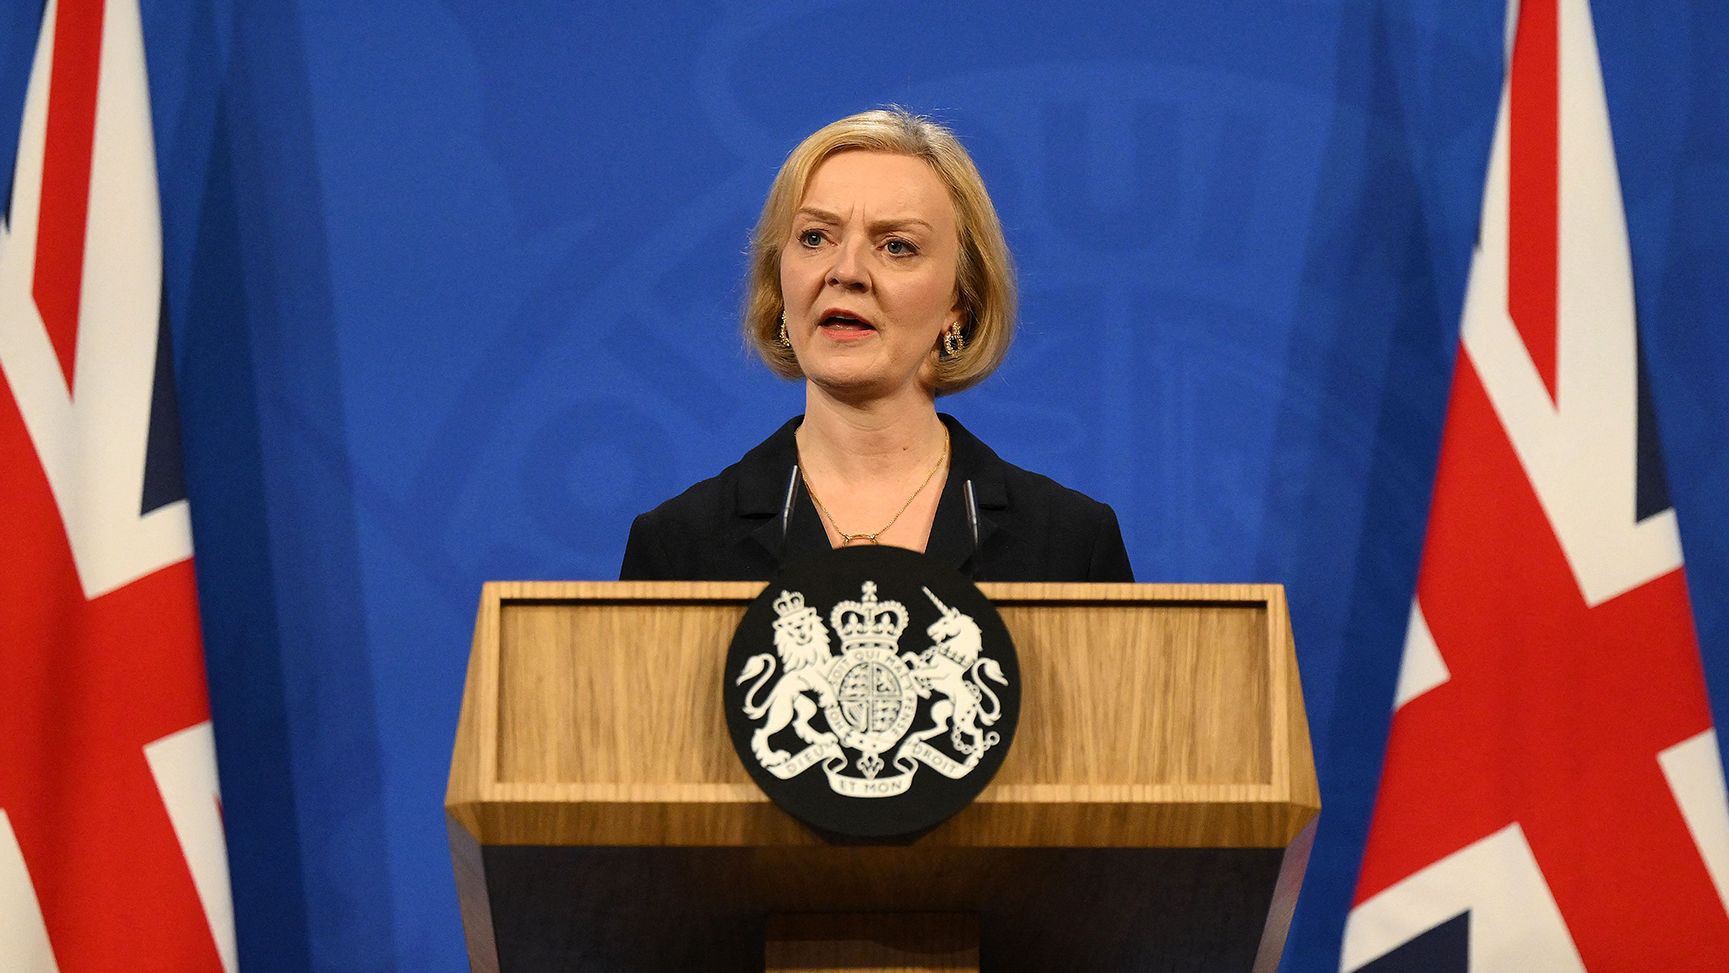 Liz Truss declined to apologize in her brief press conference on Friday to her party or the public over the turmoil unleashed by the mini-budget.